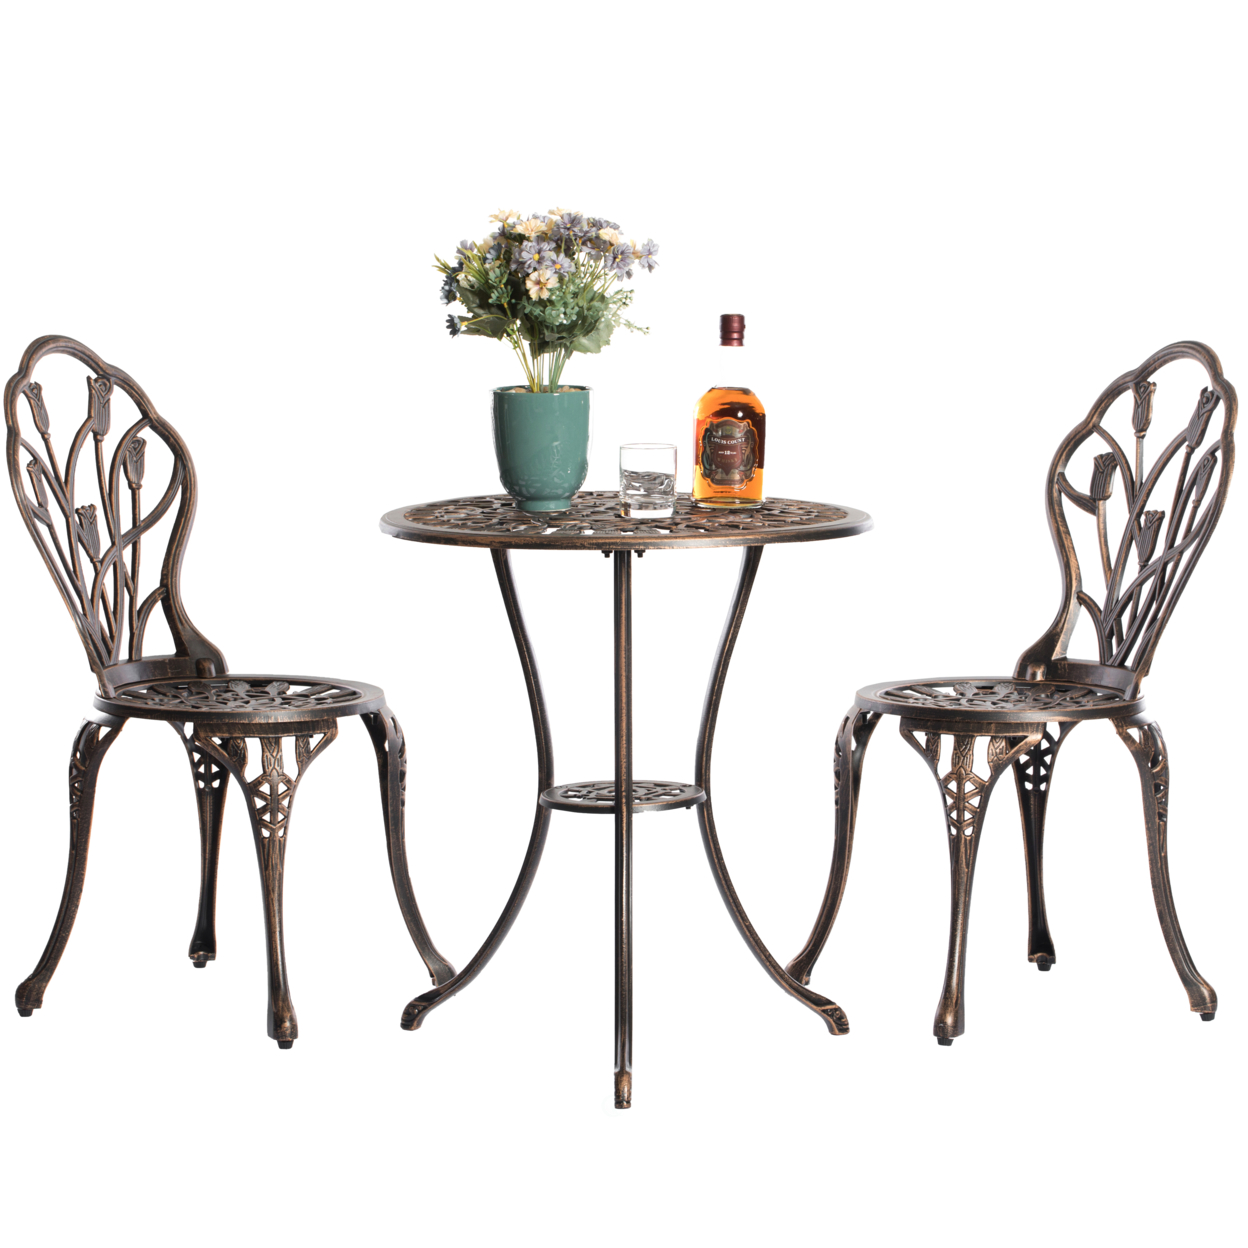 Indoor And Outdoor Bronze Dinning Set 2 Chairs With 1 Table Bistro Patio Cast Aluminum.